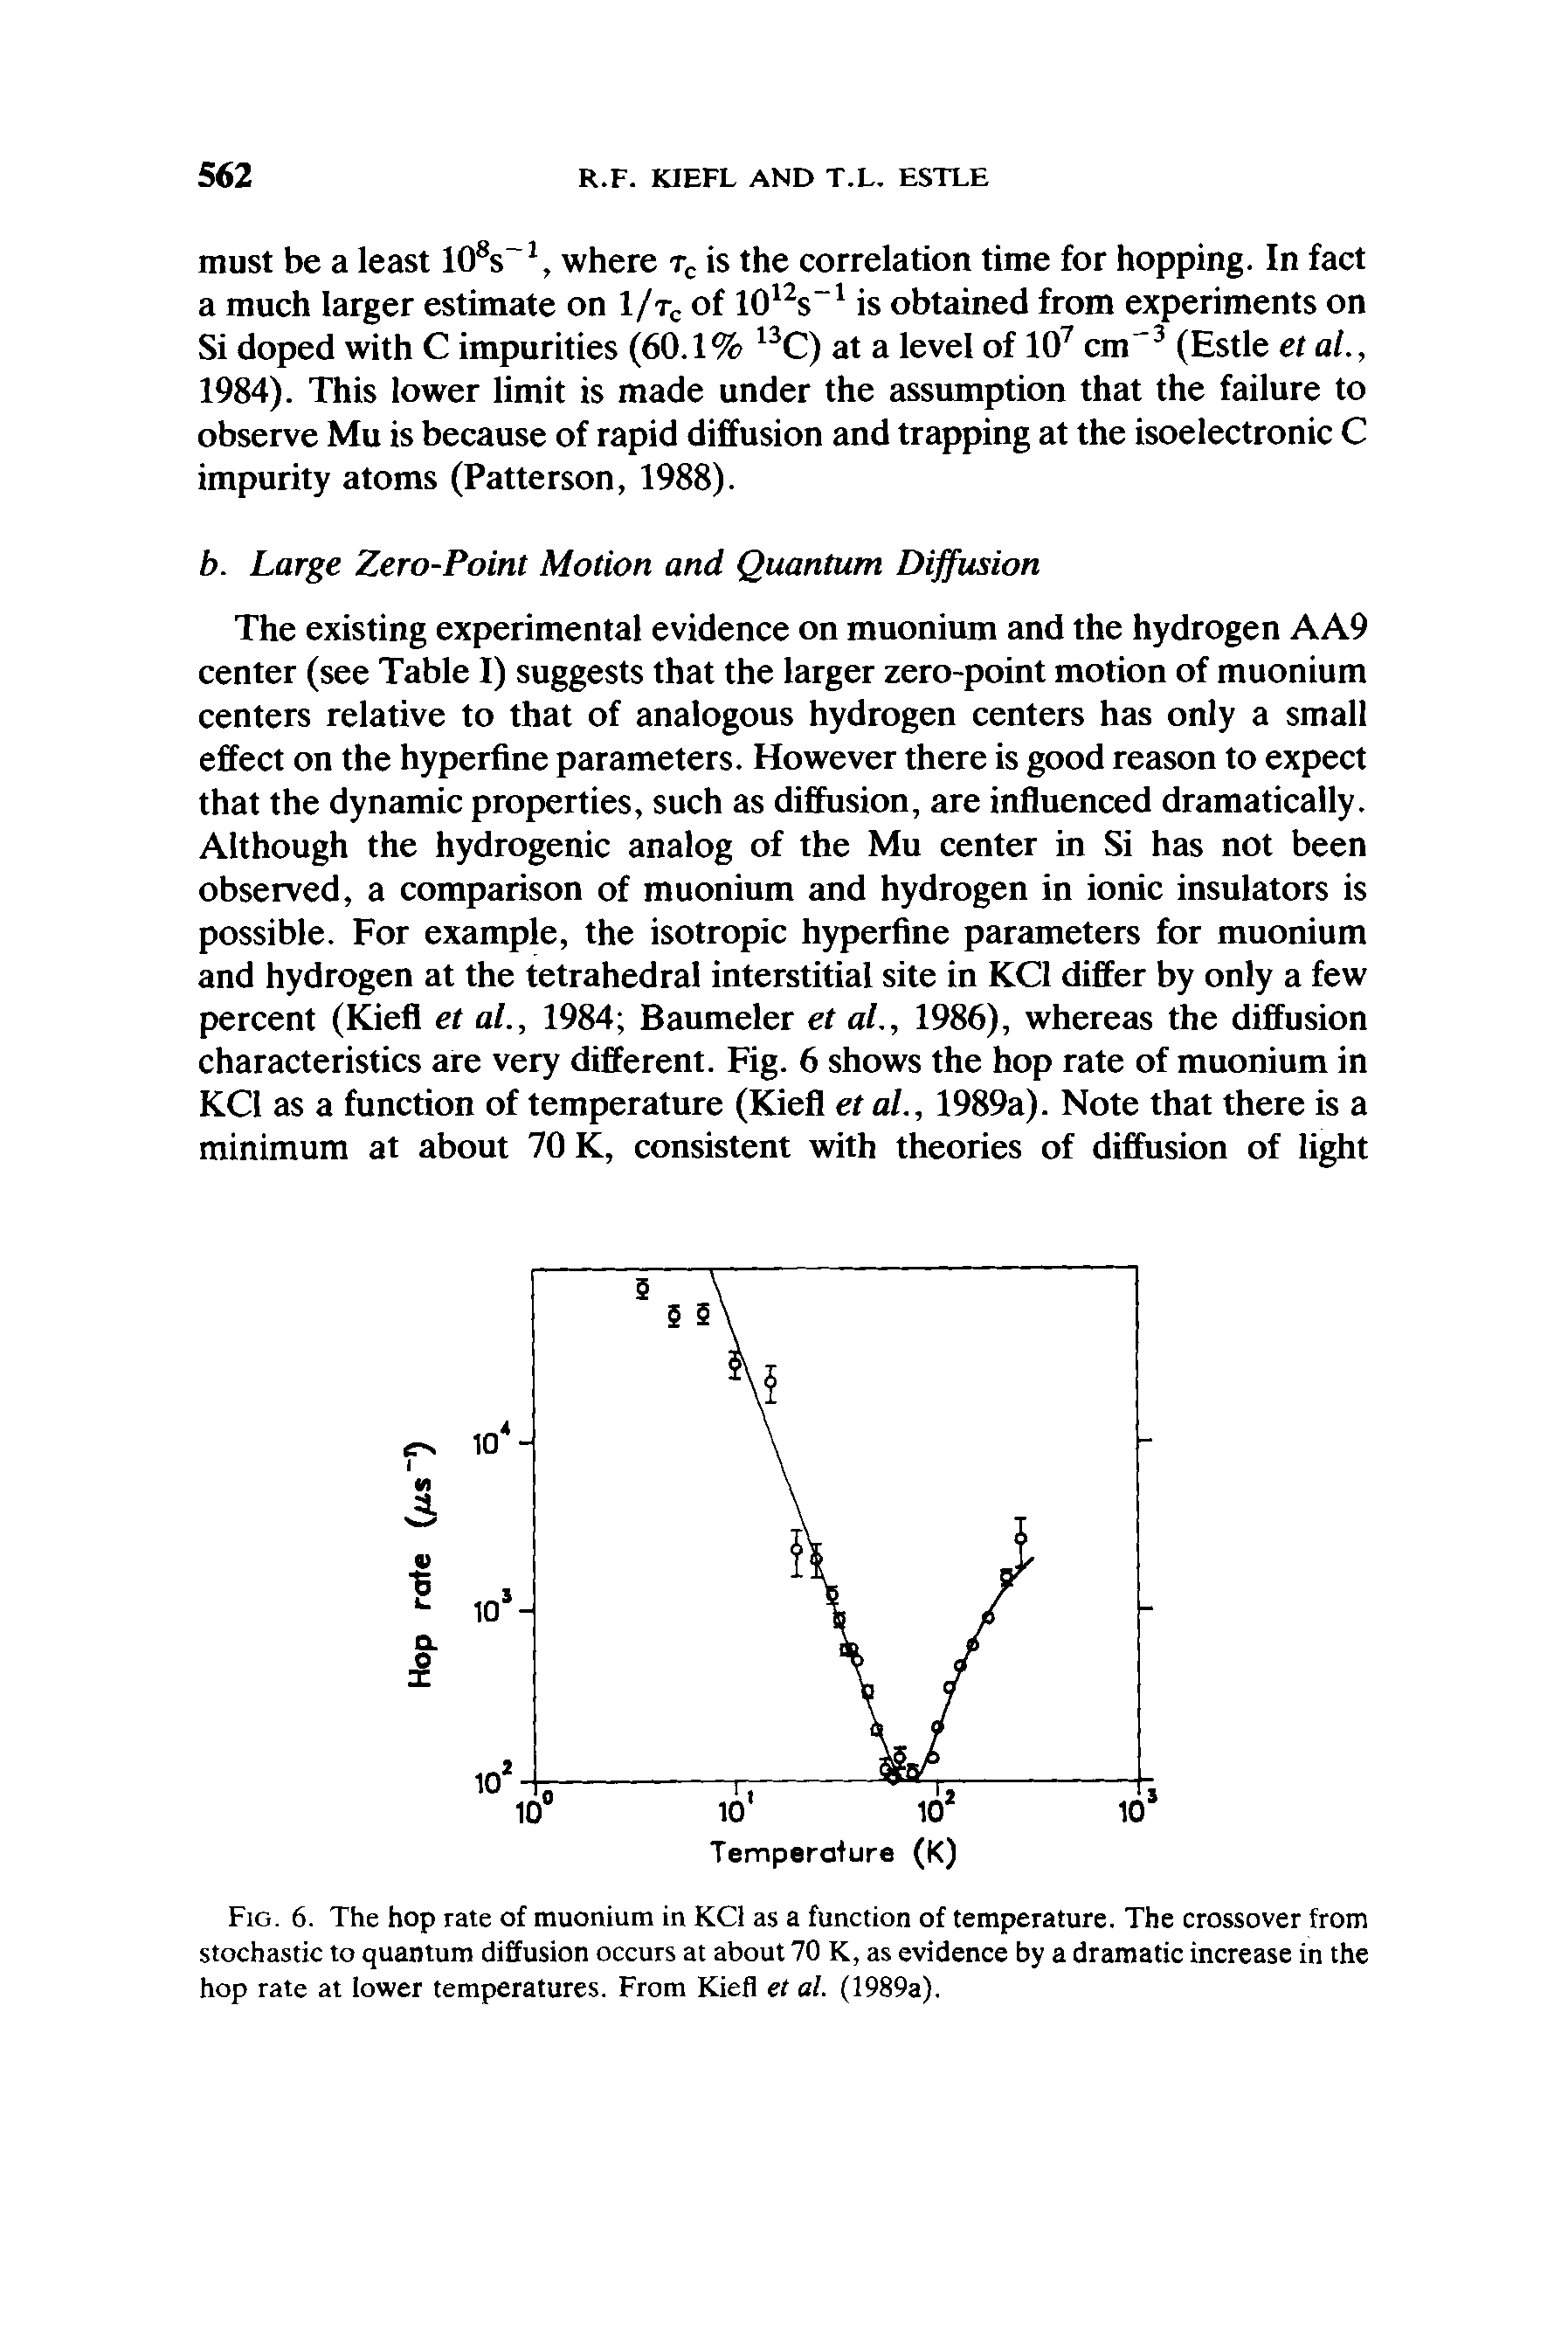 Fig. 6. The hop rate of muonium in KC1 as a function of temperature. The crossover from stochastic to quantum diffusion occurs at about 70 K, as evidence by a dramatic increase in the hop rate at lower temperatures. From Kiefl et al. (1989a).